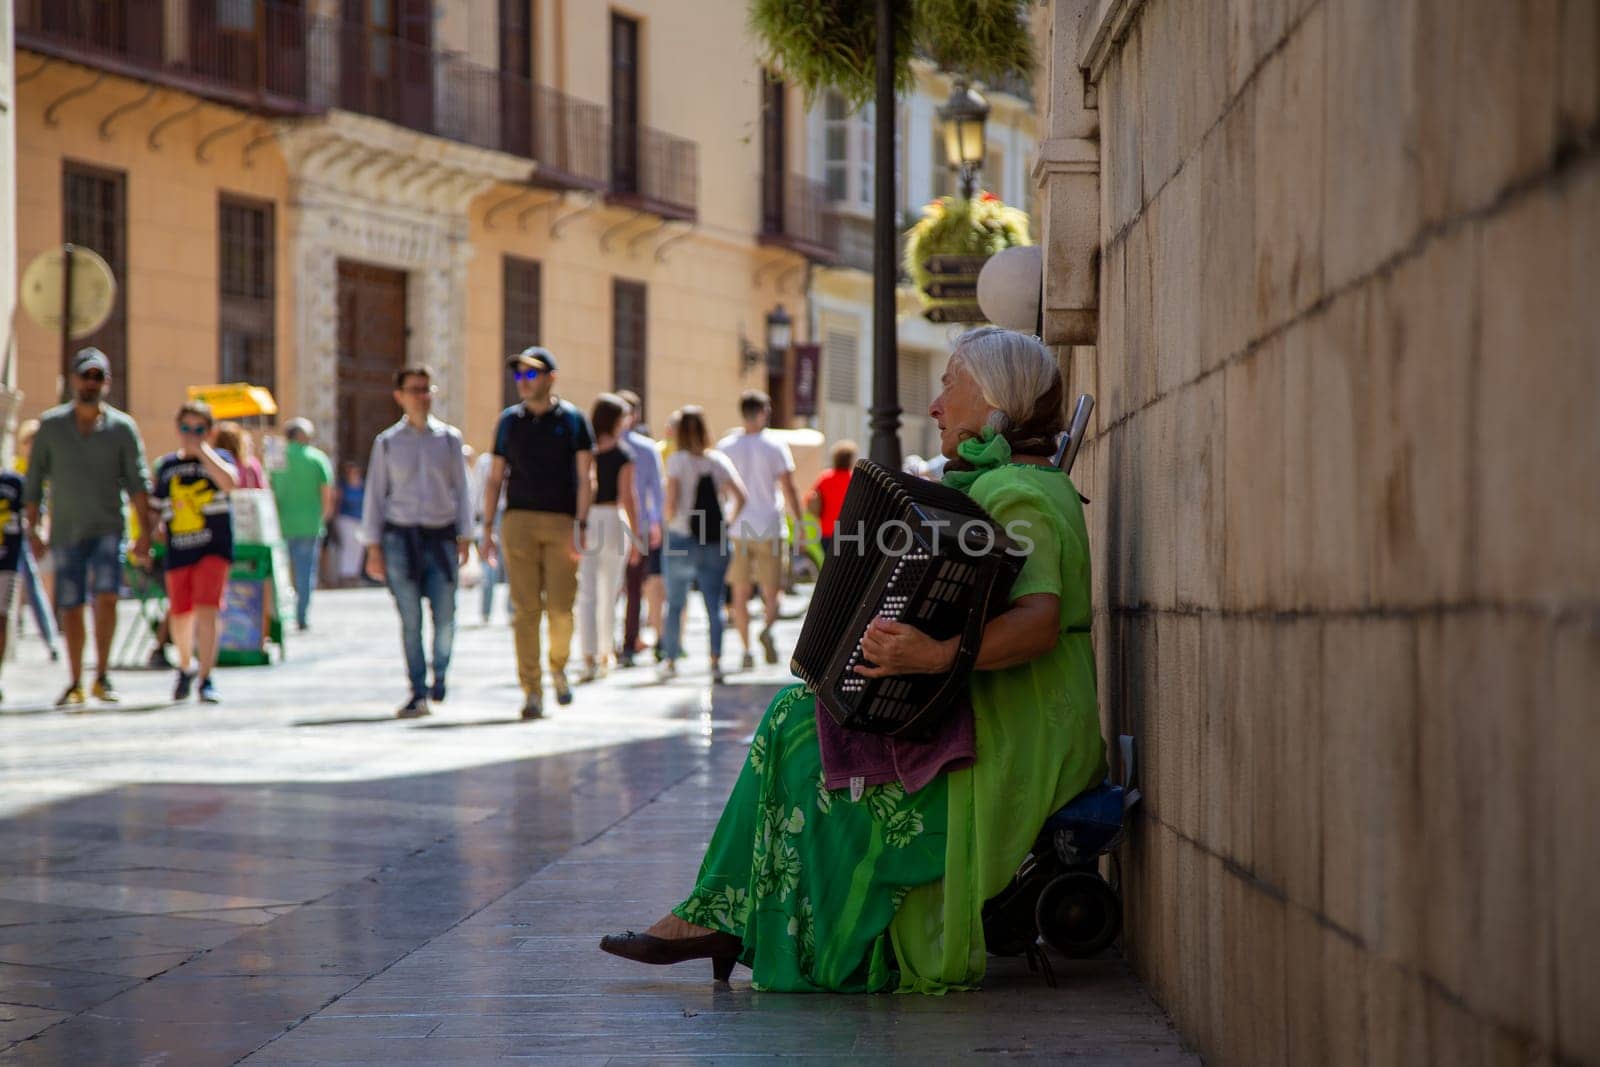 Malaga, Spain - May 25, 2019: A street musician performing in the historic city center.